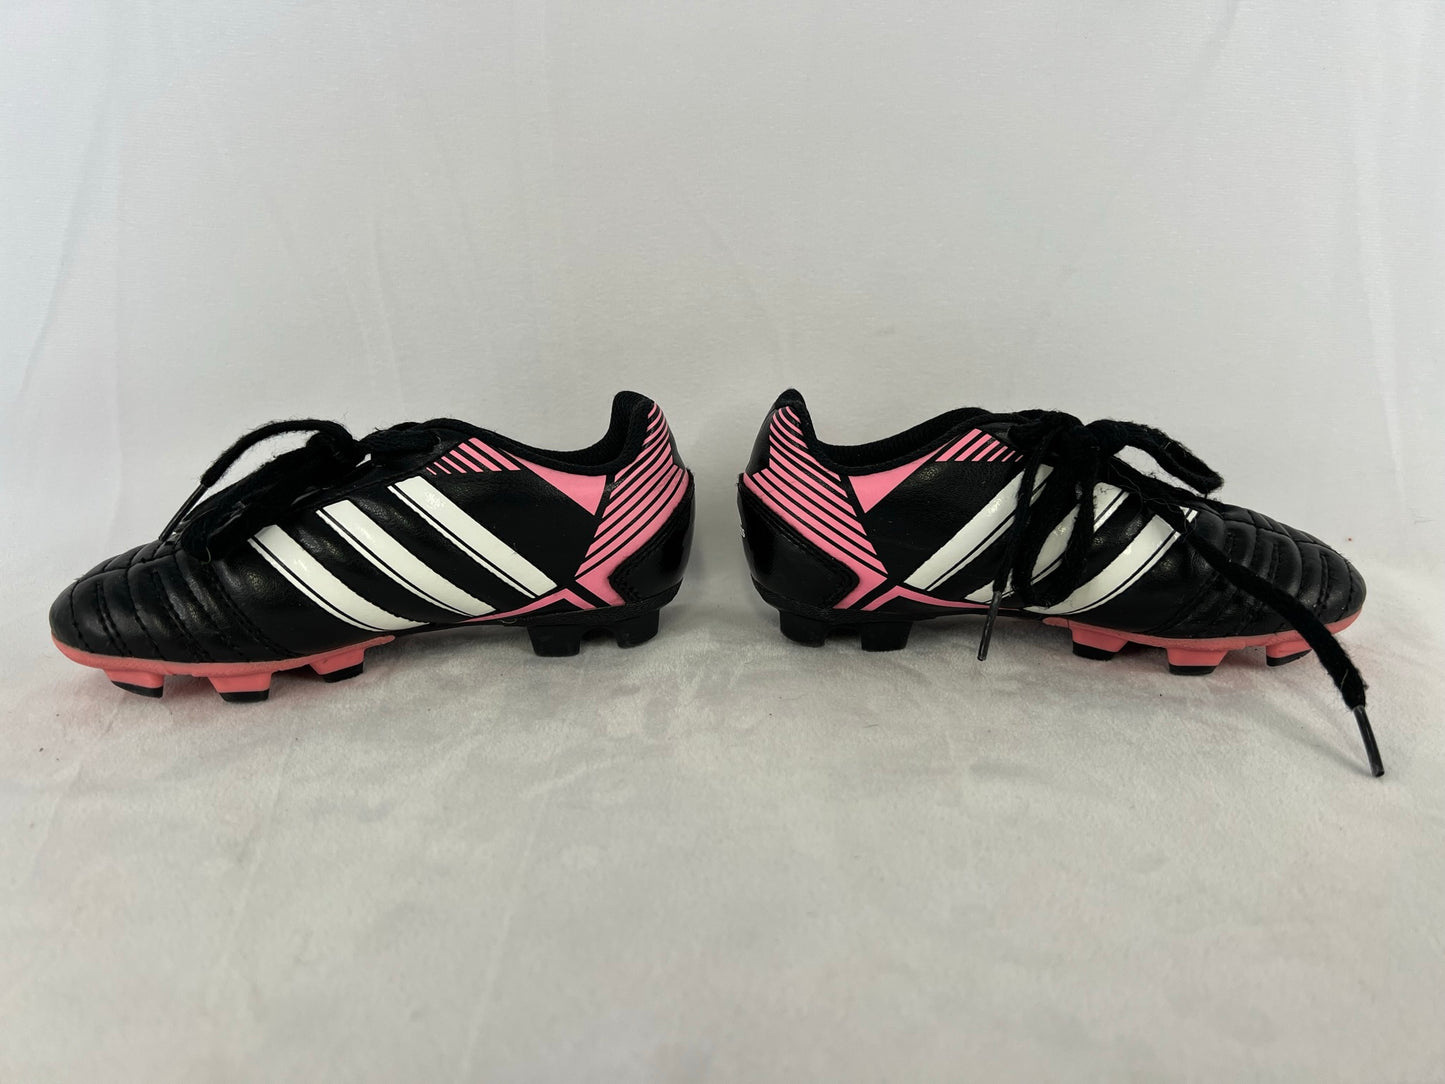 Soccer Shoes Cleats Child Size 11 Adidas Black White Pink Excellent